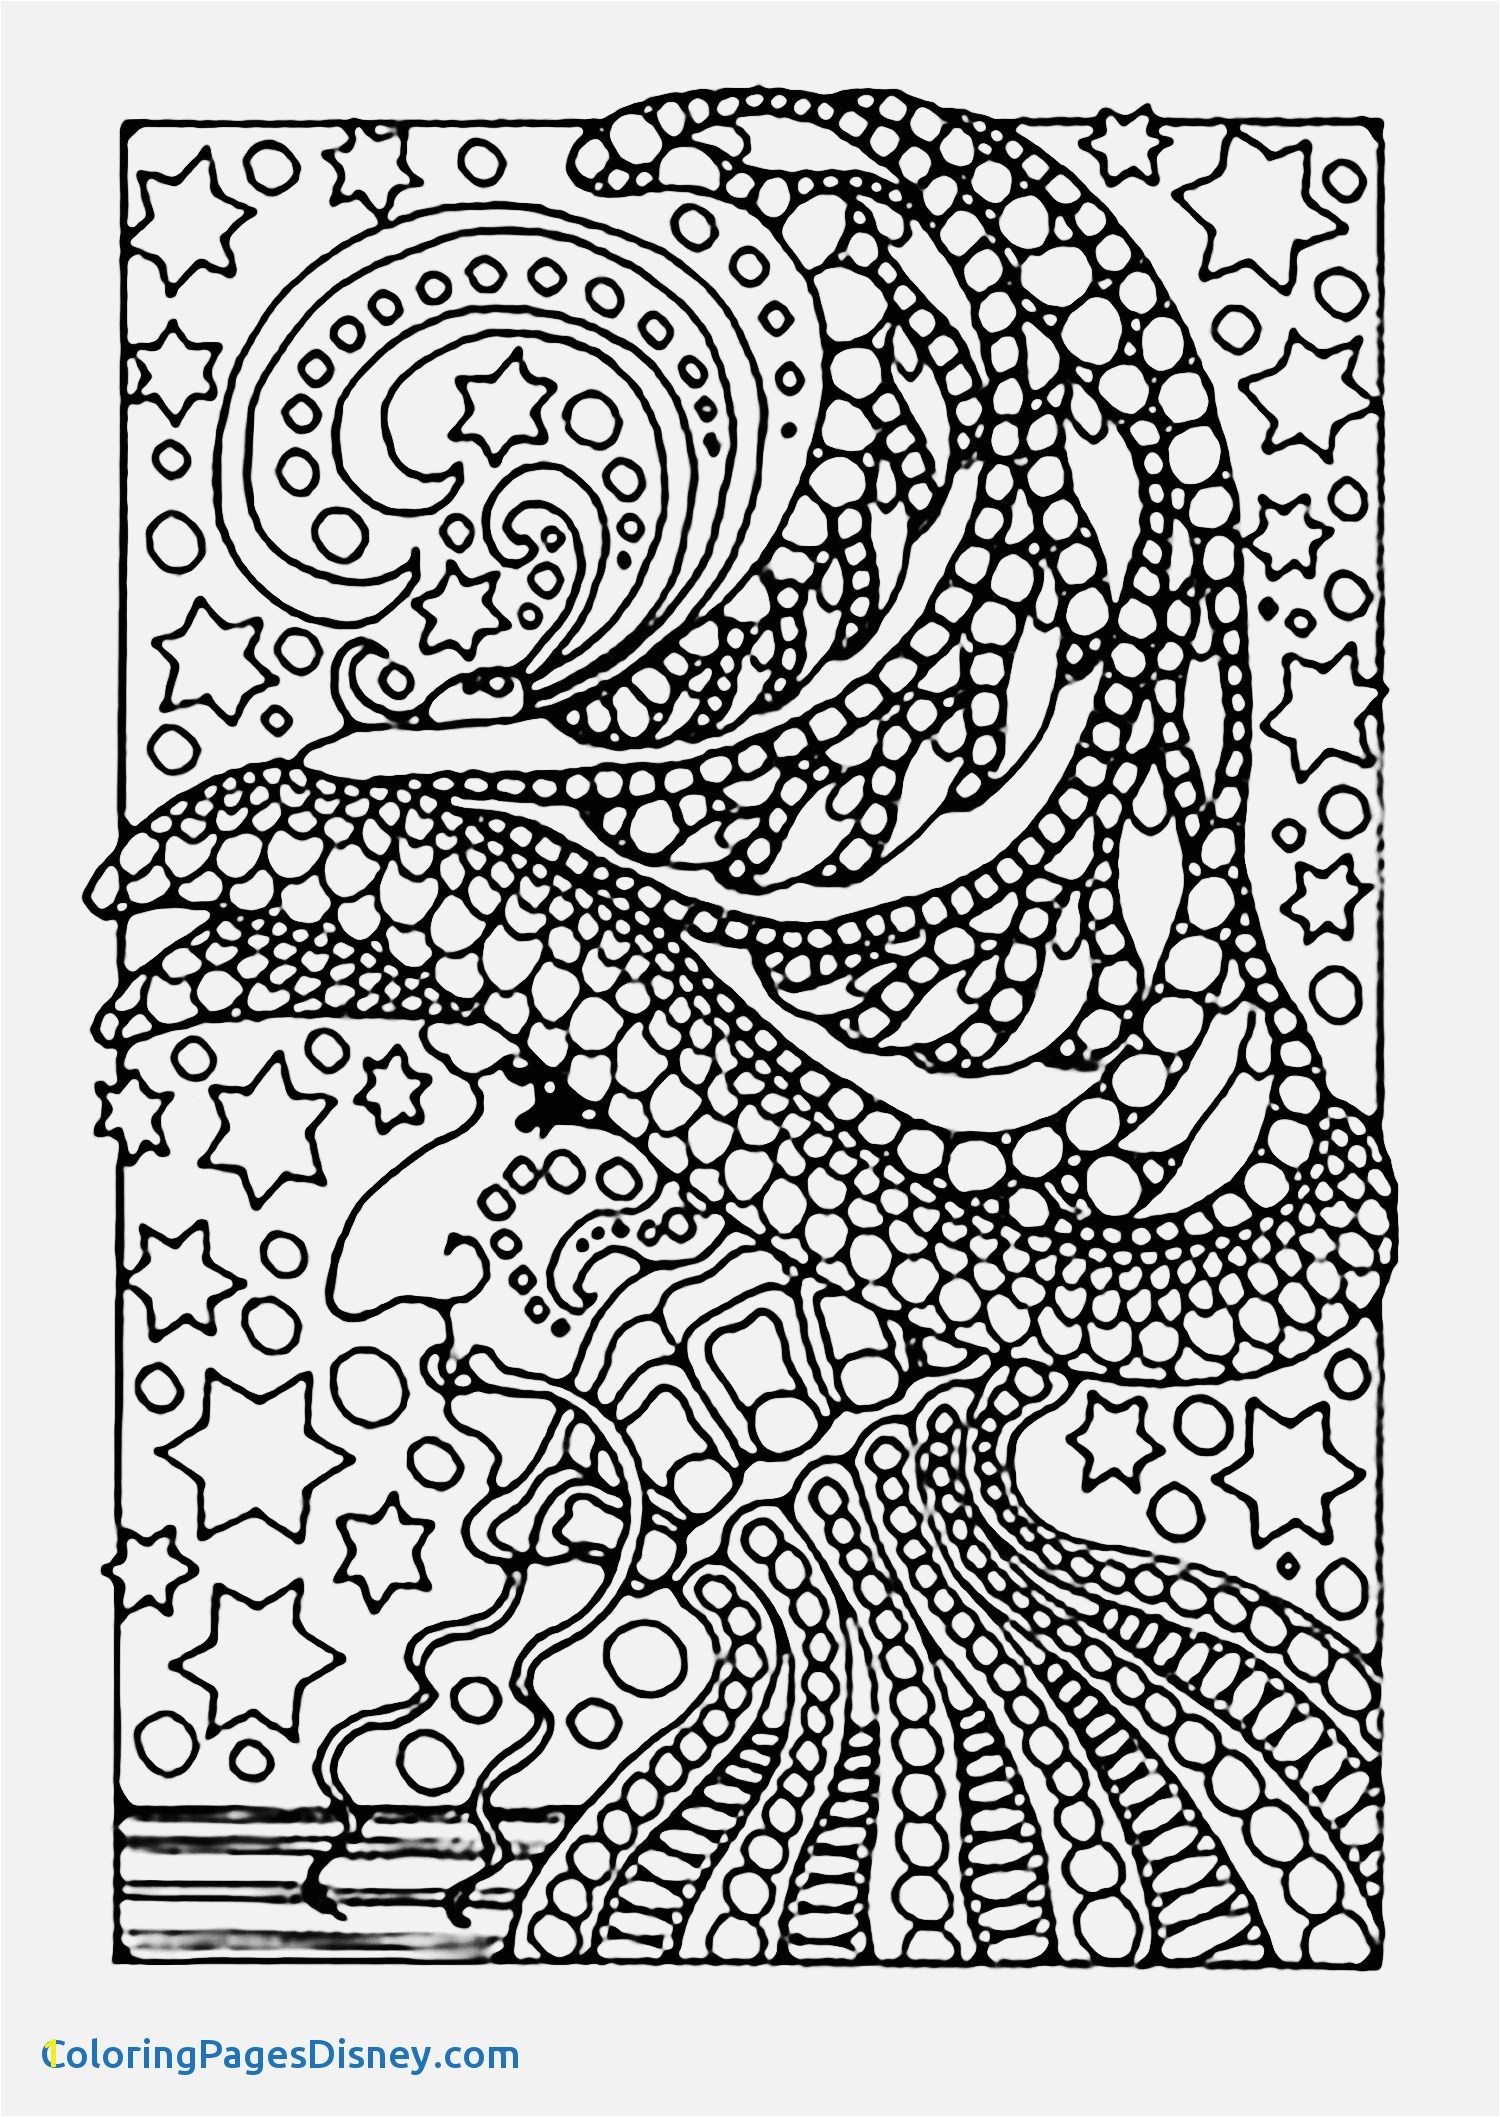 Mm Coloring Pages 18best where to Buy Coloring Books Clip Arts & Coloring Pages